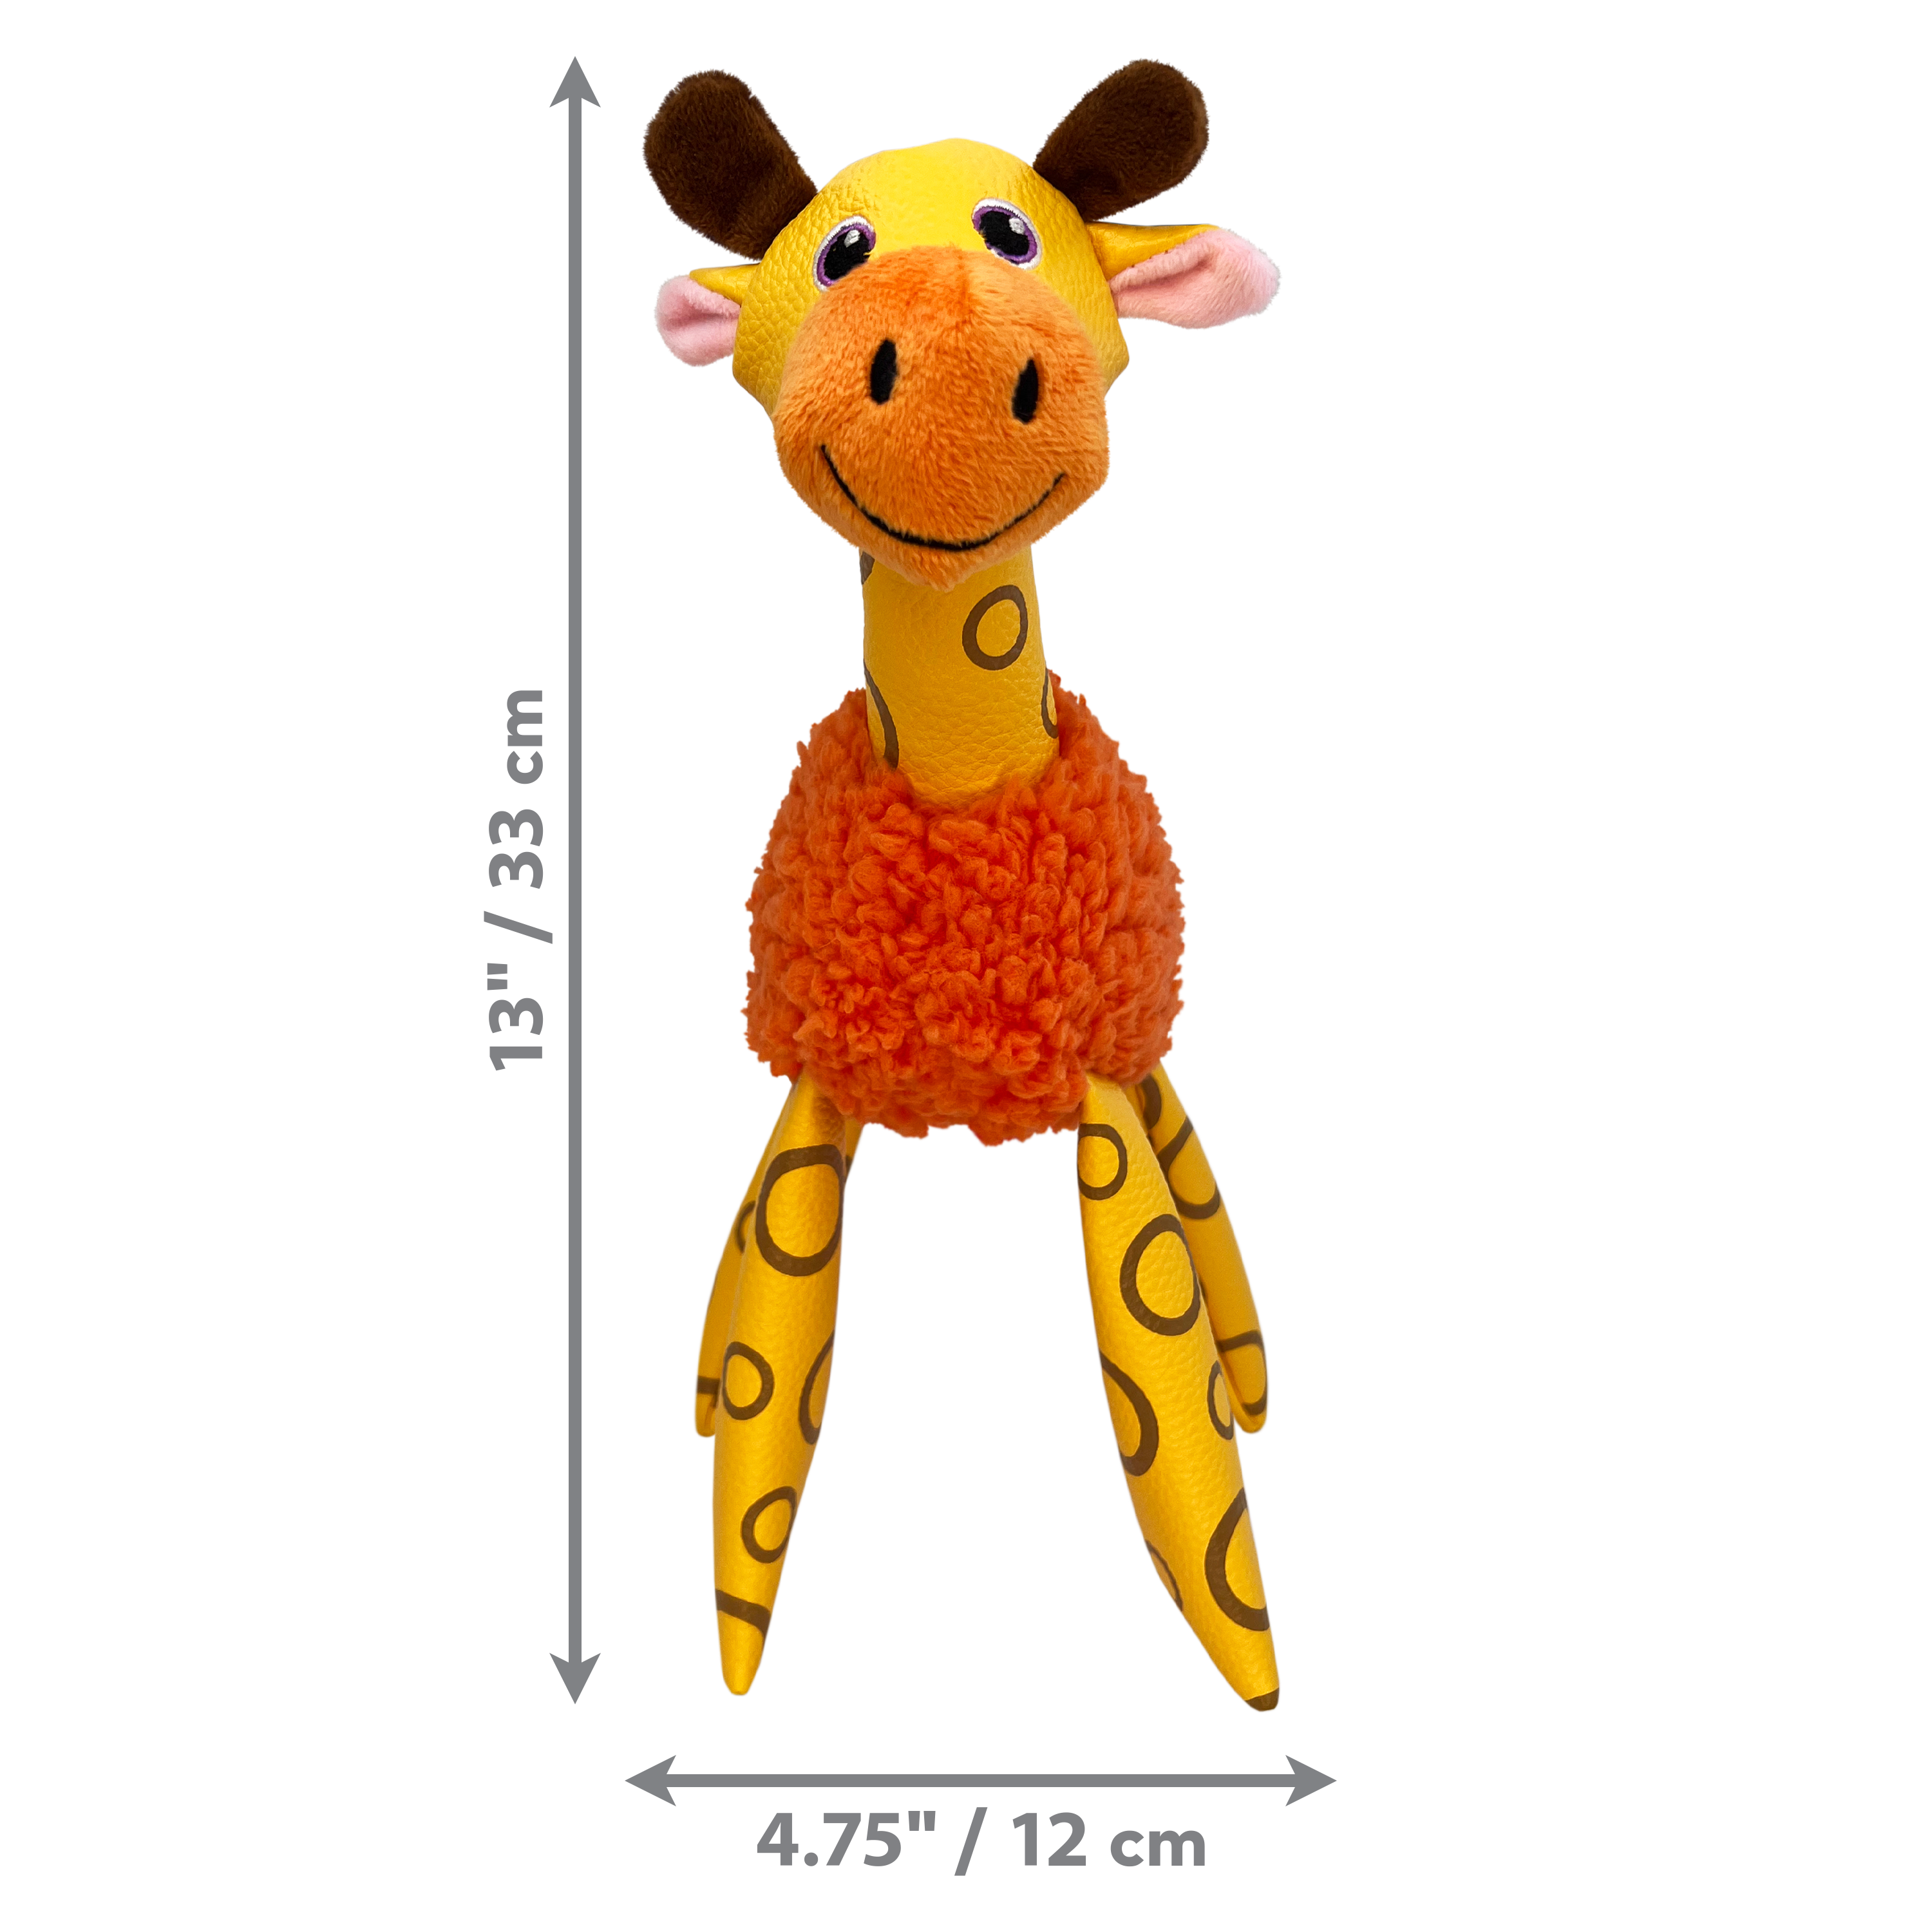 Floofs Shakers Giraffe dimoffpack product afbeelding